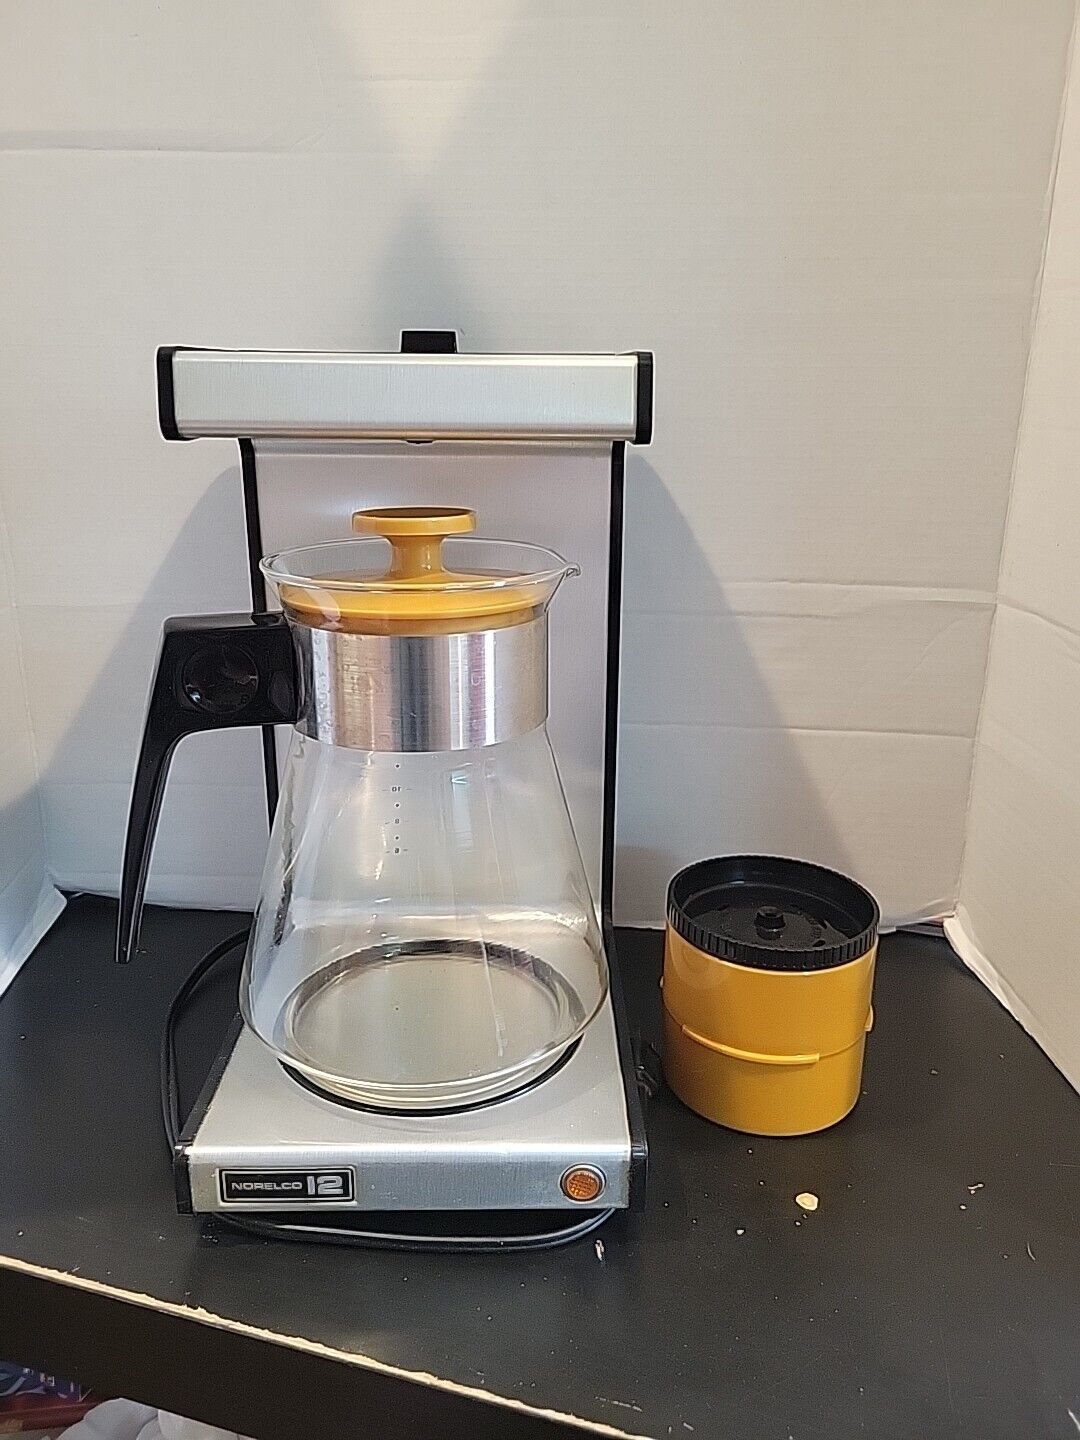 Norelco 12 Ready Brew Cup Coffee Maker HB5135 Automatic Drip Vintage 1974 70s